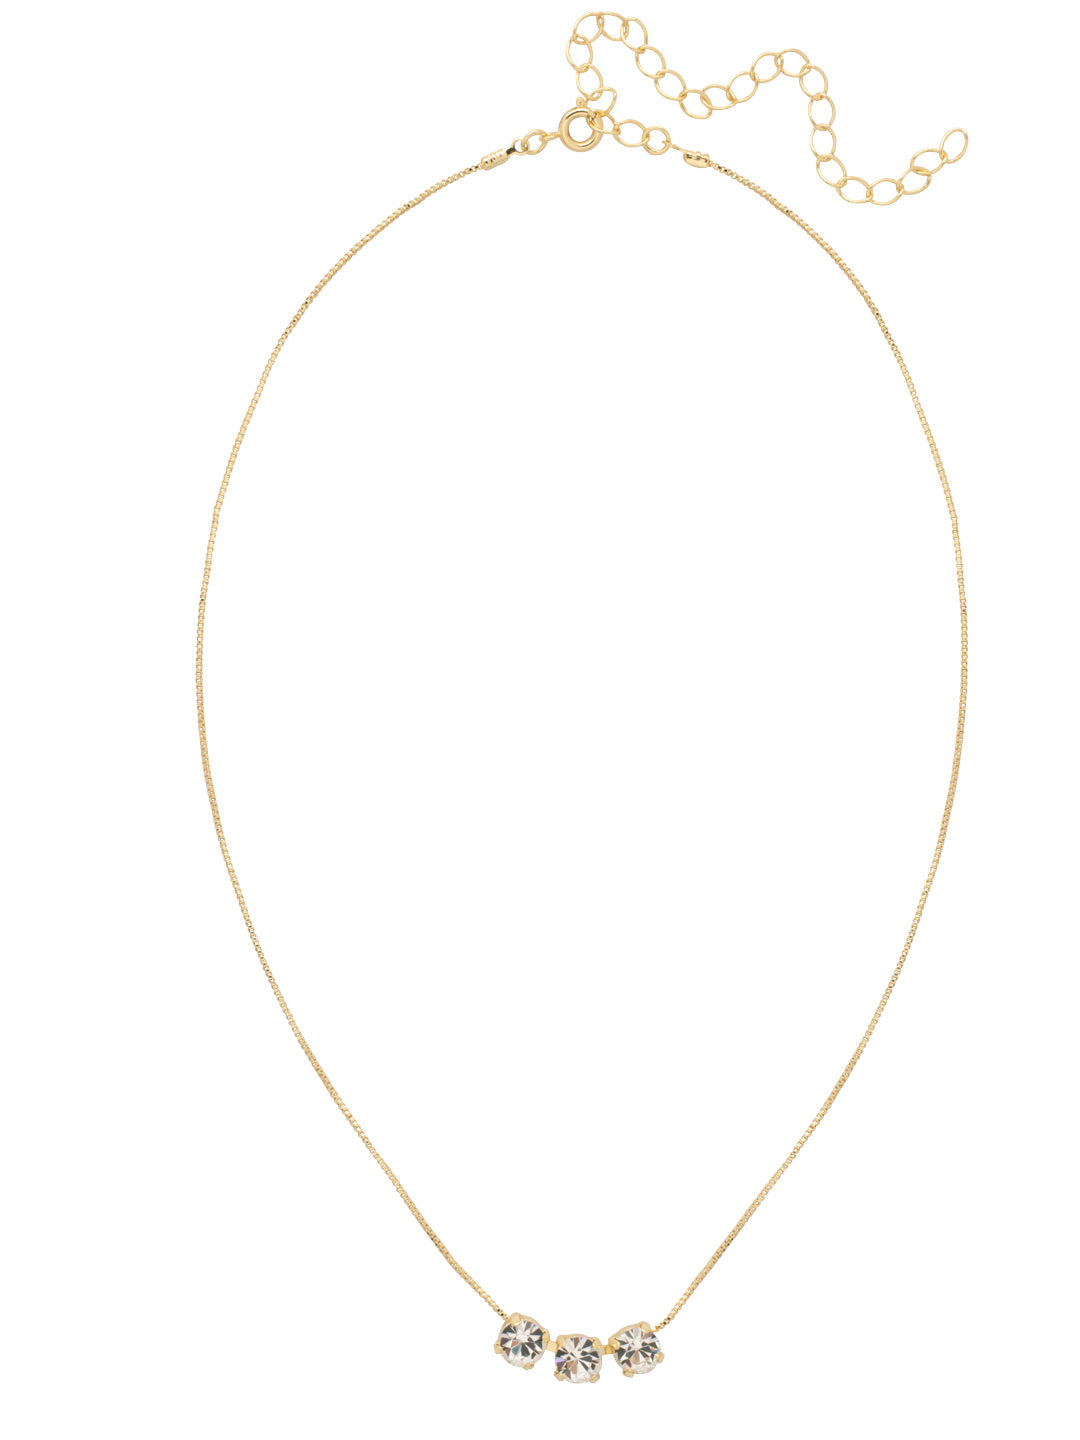 Triple Stud Tennis Necklace - NFM4BGCRY - <p>The Triple Stud Tennis Necklace is a minimal take on our popular Shaughna Tennis Necklace, featuring only three crystal studs instead of five on an adjustable chain secured with a spring ring claps, for a subtle sparkle. From Sorrelli's Crystal collection in our Bright Gold-tone finish.</p>